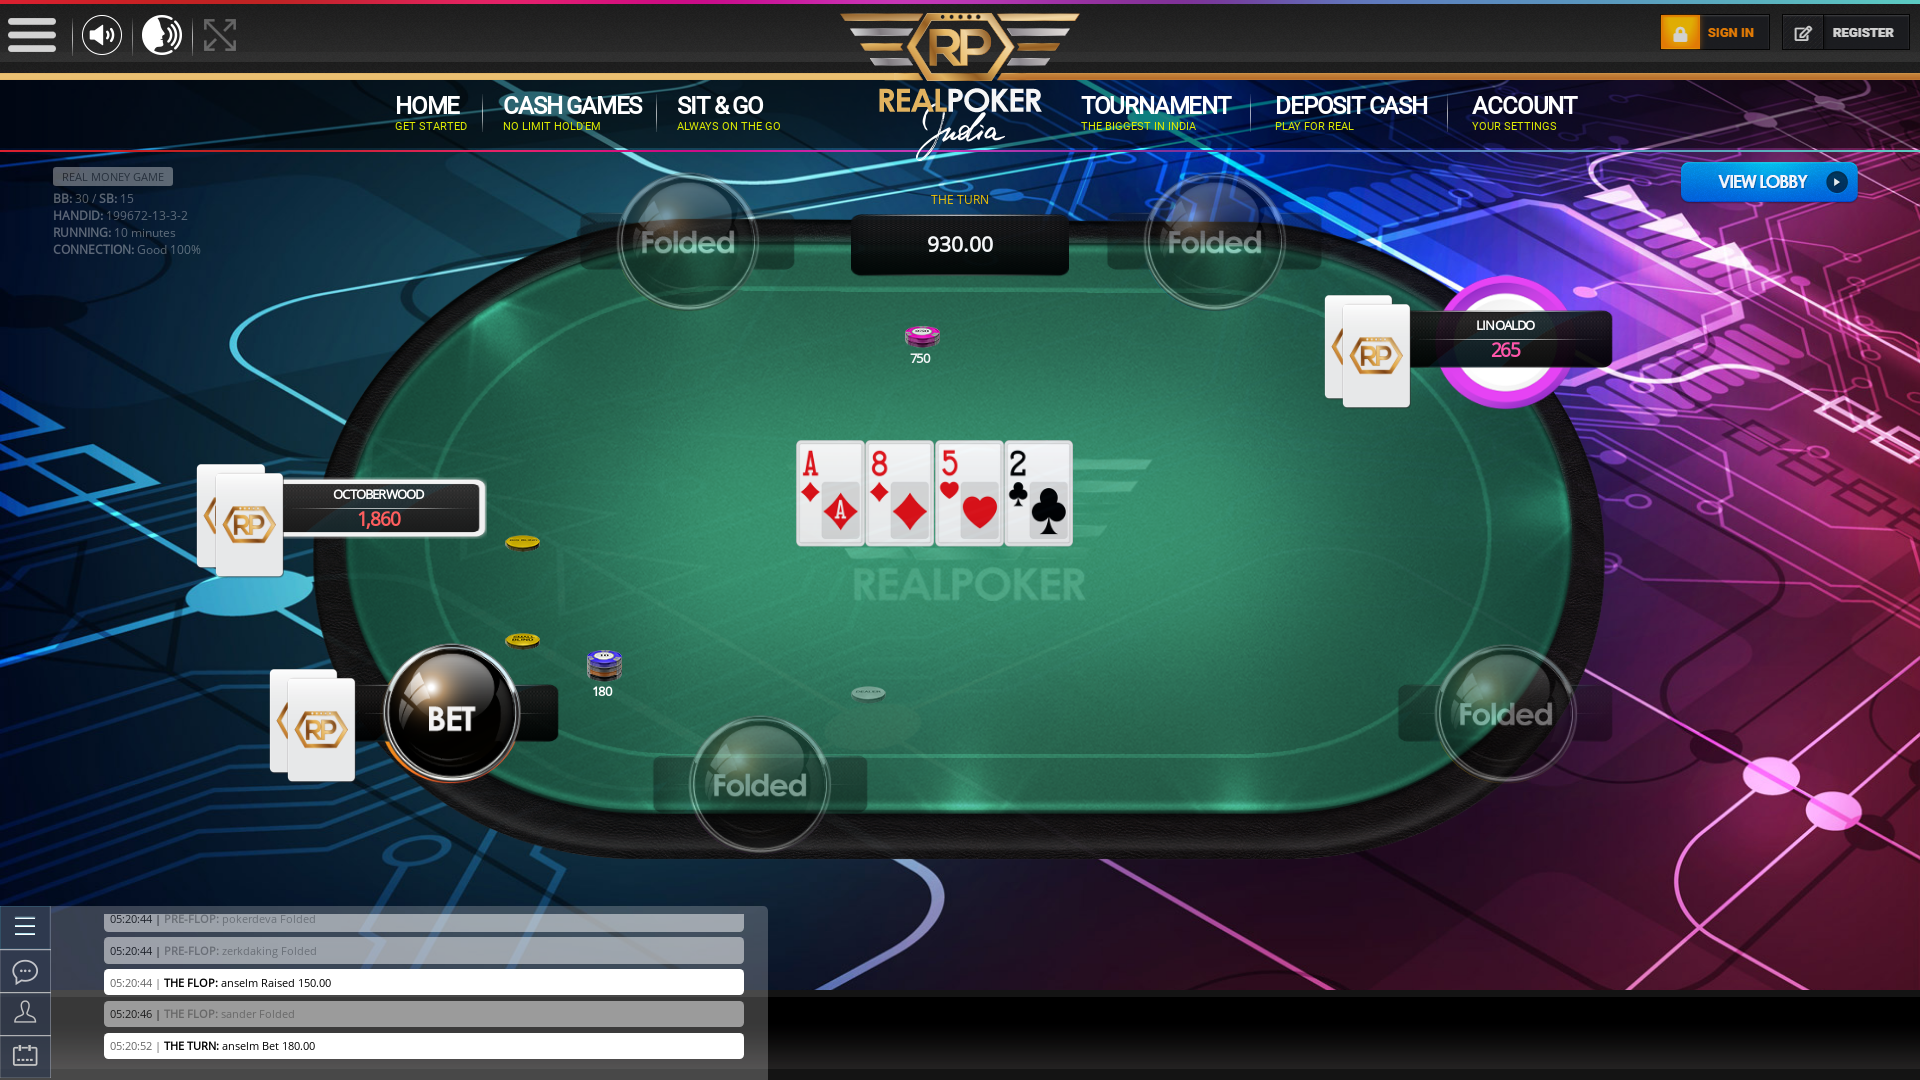 Online poker on a 10 player table in the 9th minute match up